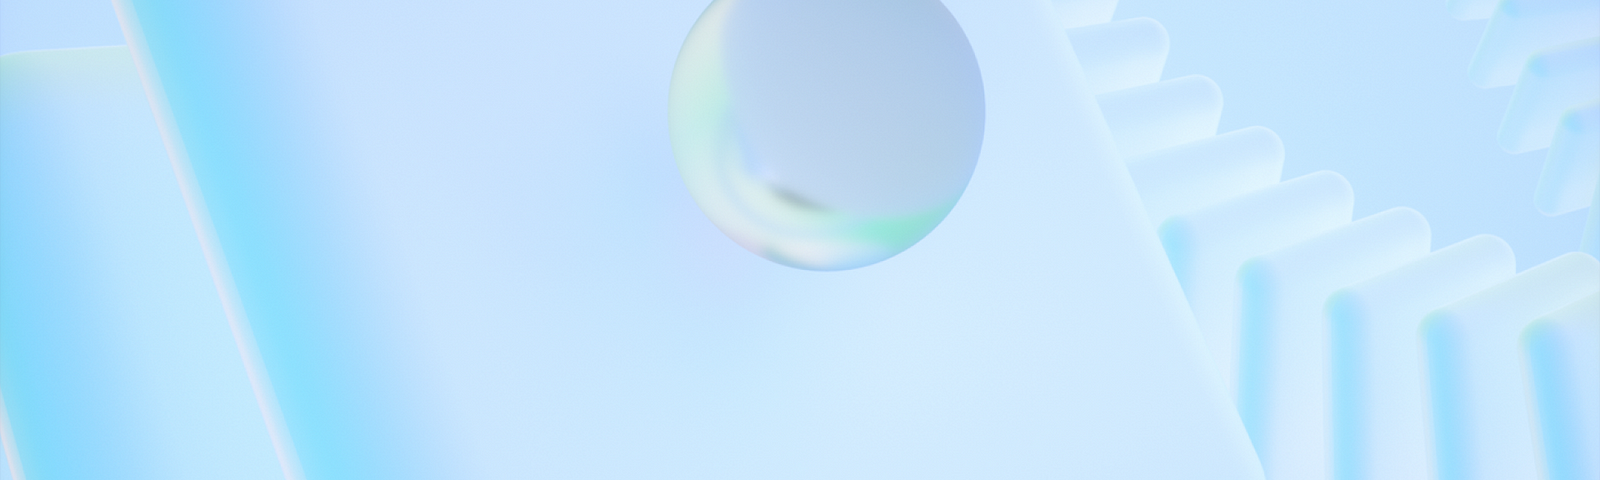 An abstract image of a bubble-like sphere superimposed on rectangular shapes, all in hues of light blue and purples